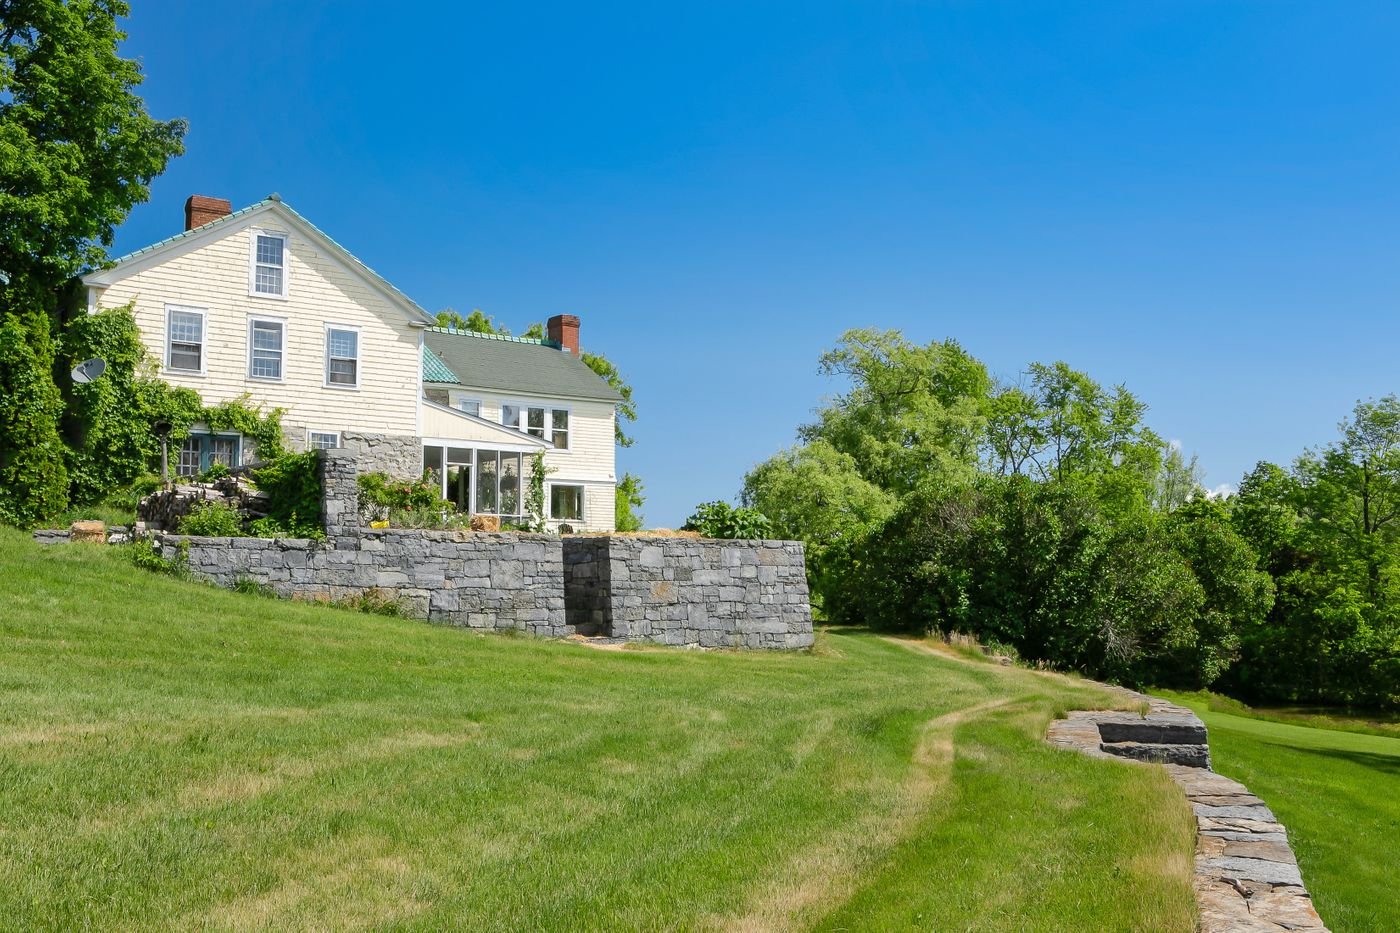 Francis York This New England Estate Comes with a Restored 18th Century Farmhouse and Entertainment Barns 12.jpeg